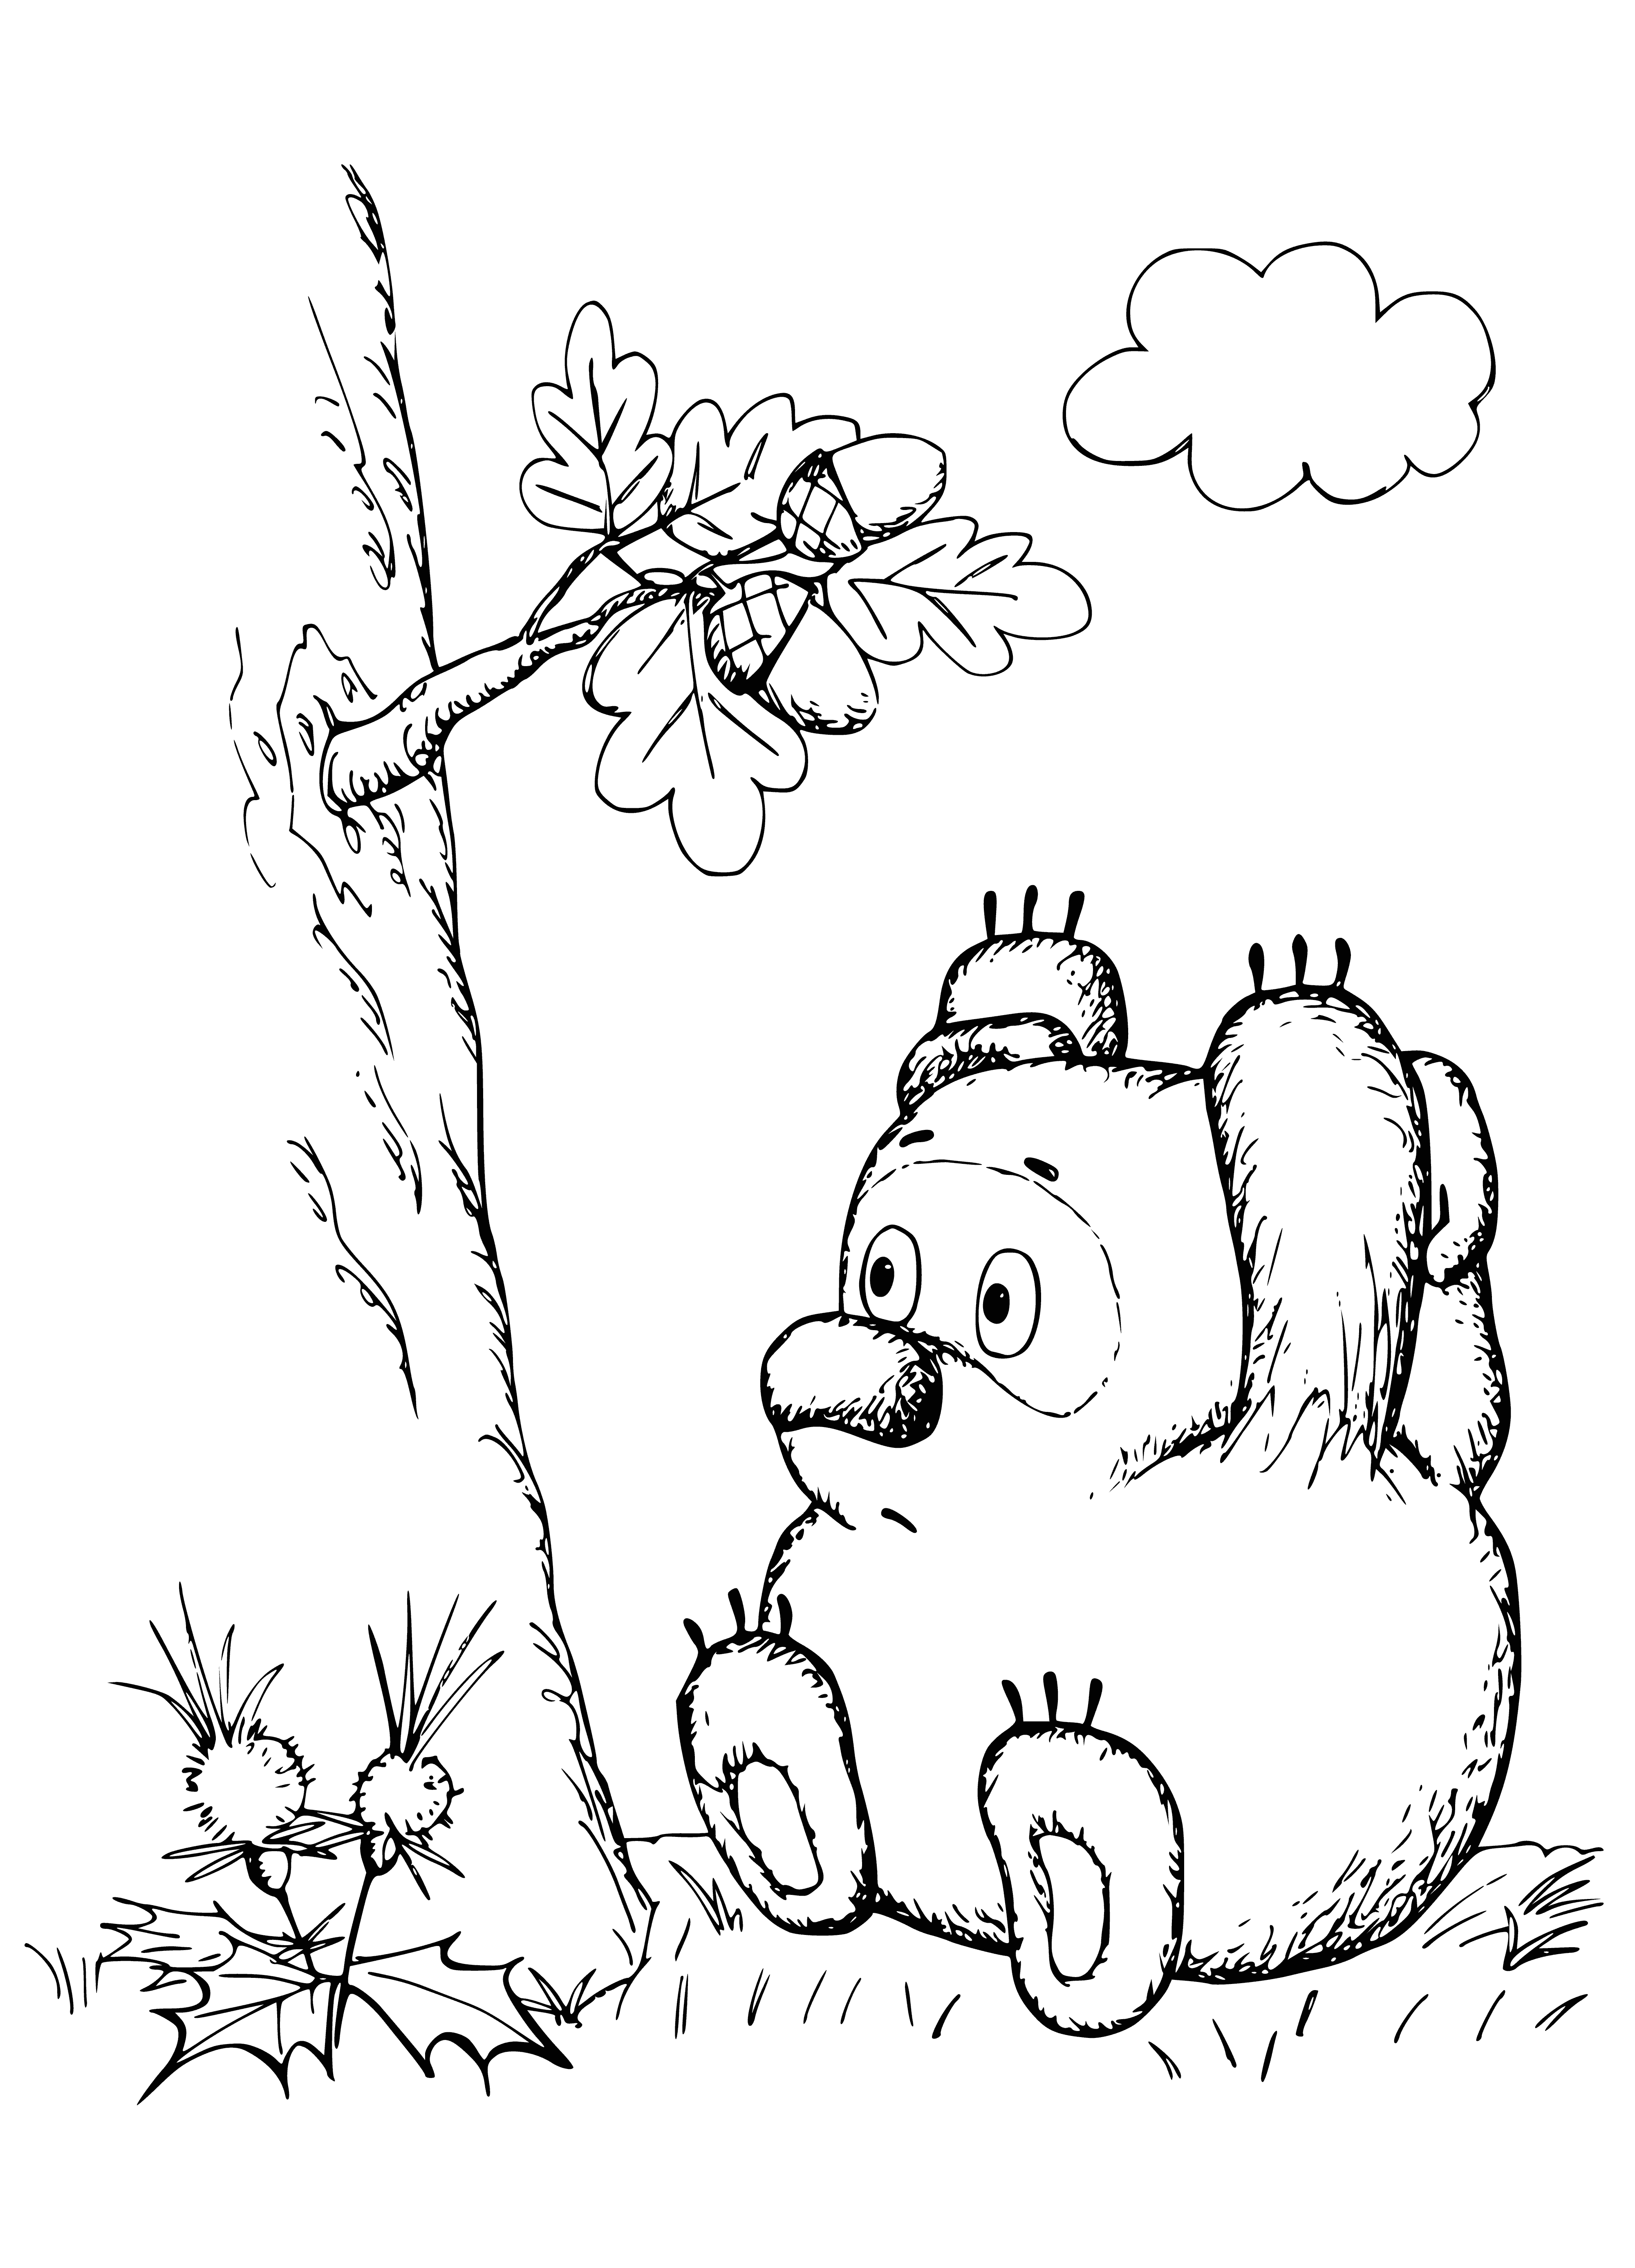 coloring page: Winnie the Pooh is a chubby, yellow bear with a red shirt, hunny pot, and a red bird perched above him. #WinnieThePooh